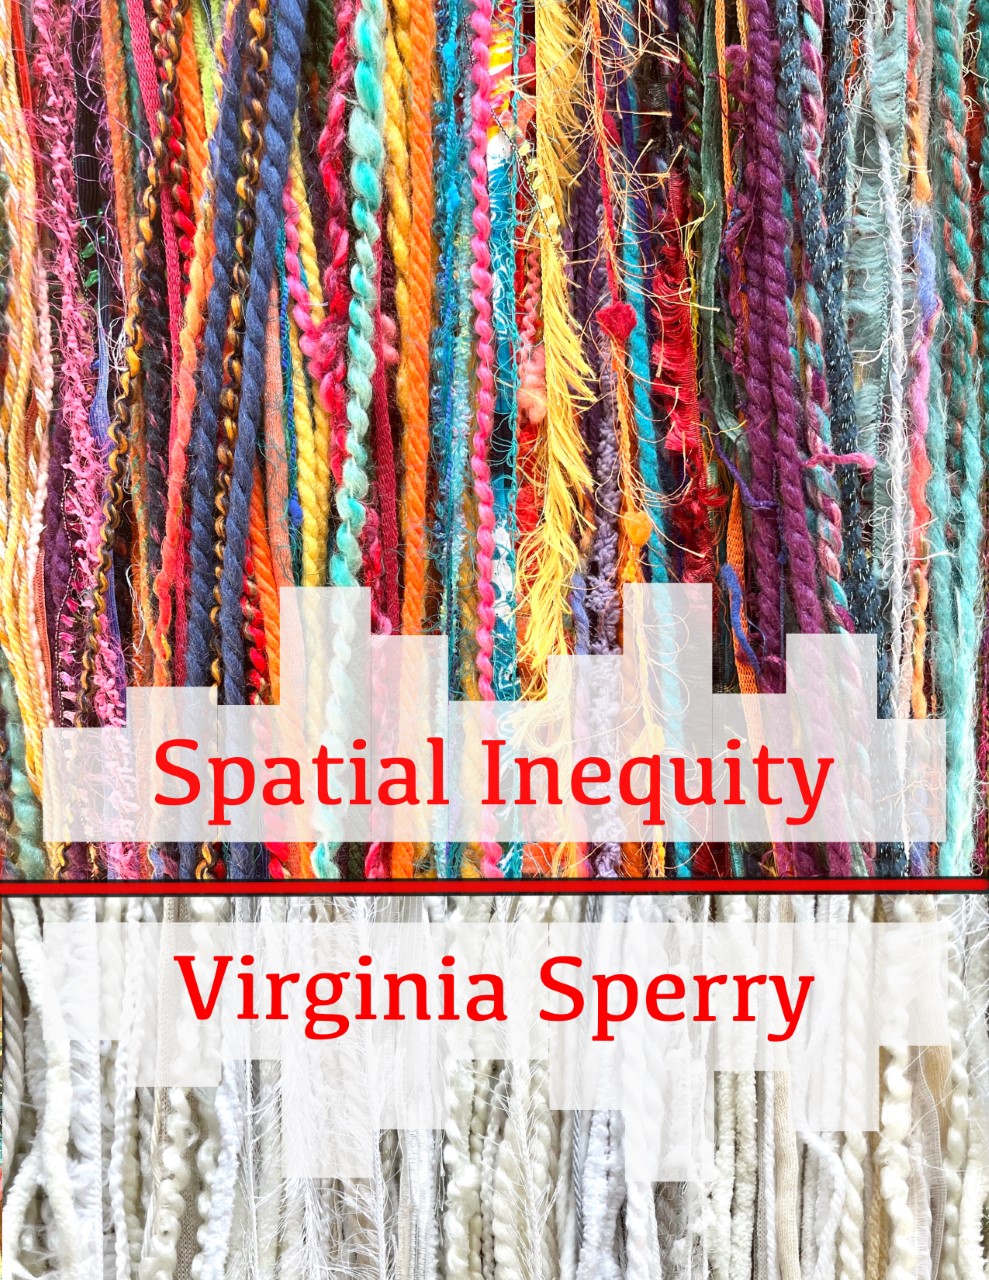 spatial inequity image with yarn